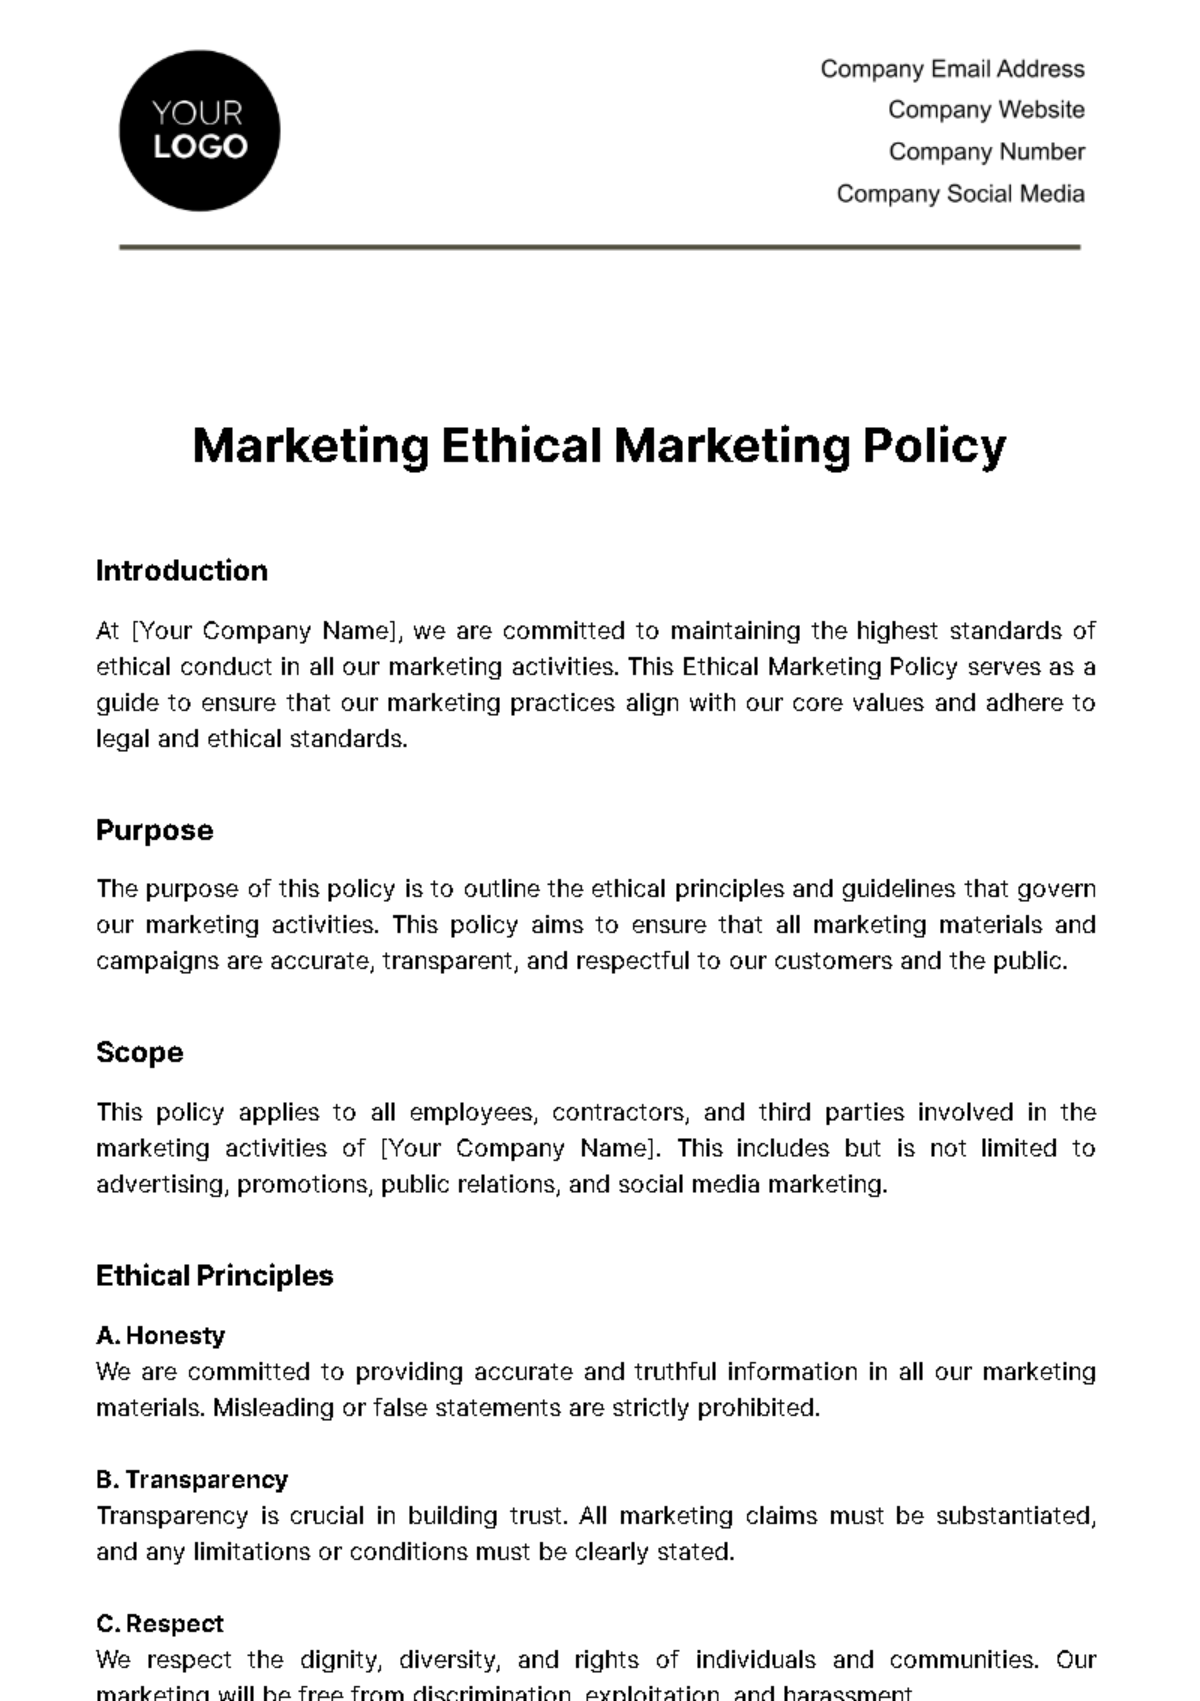 Free Marketing Ethical Marketing Policy Template